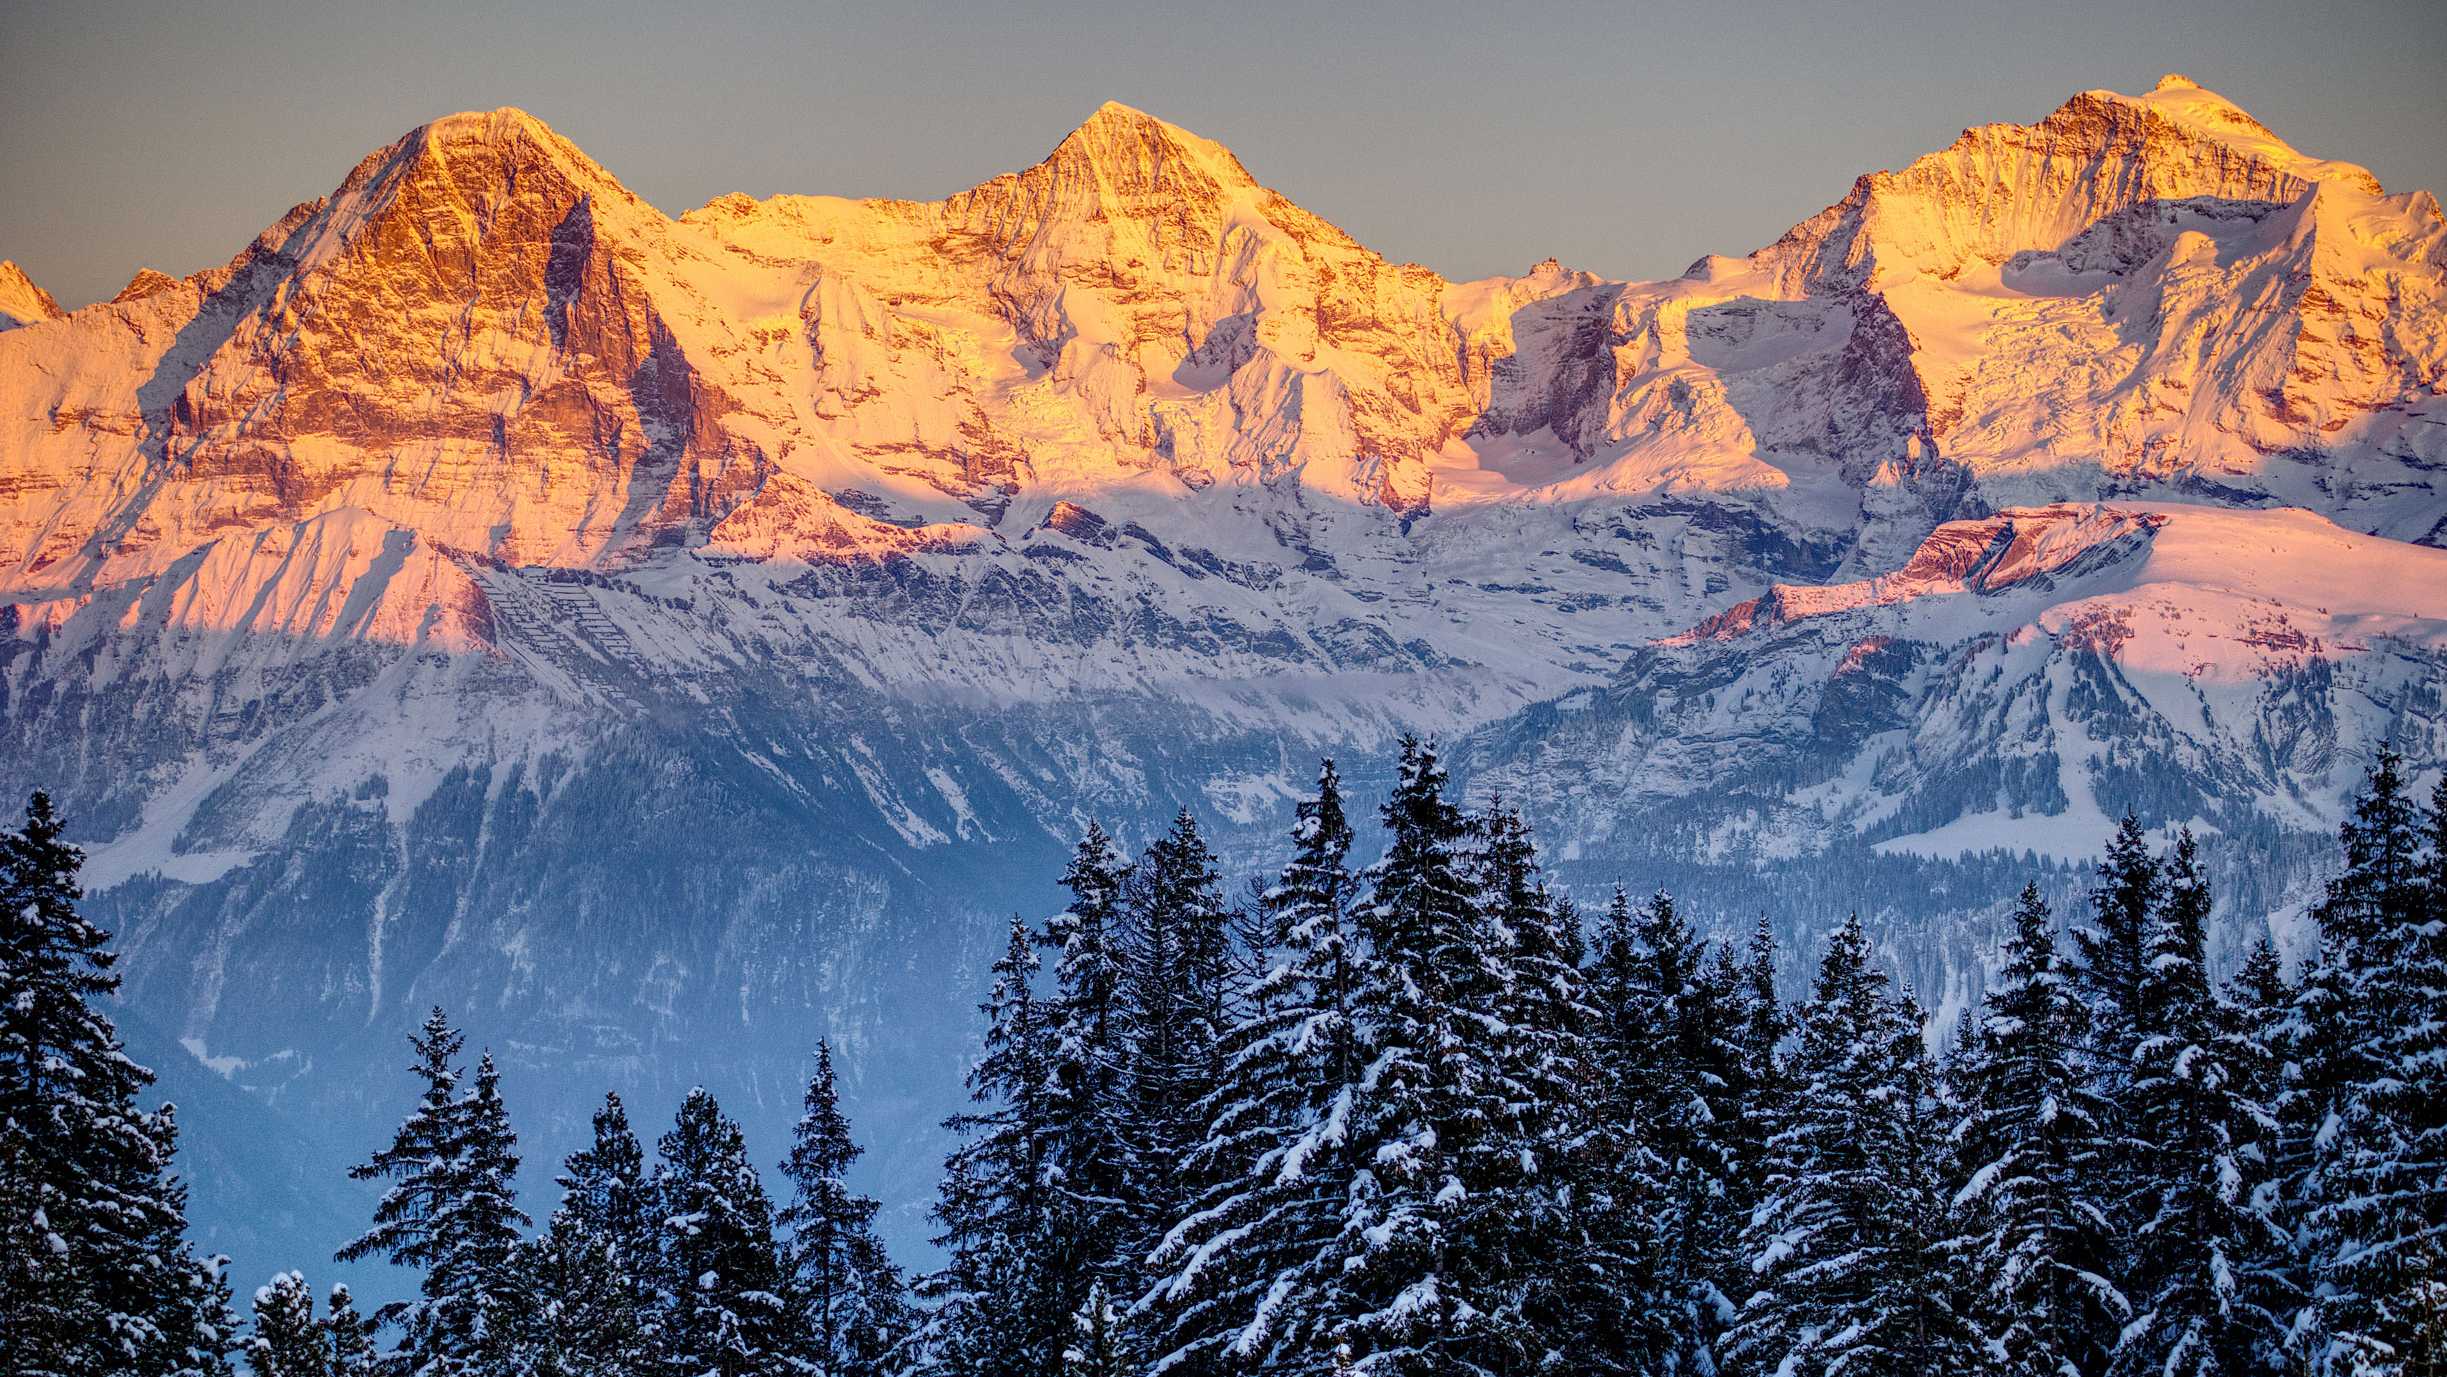 The Swiss mountains Eiger, Mönch and Jungfrau in the reddish glow of the sun